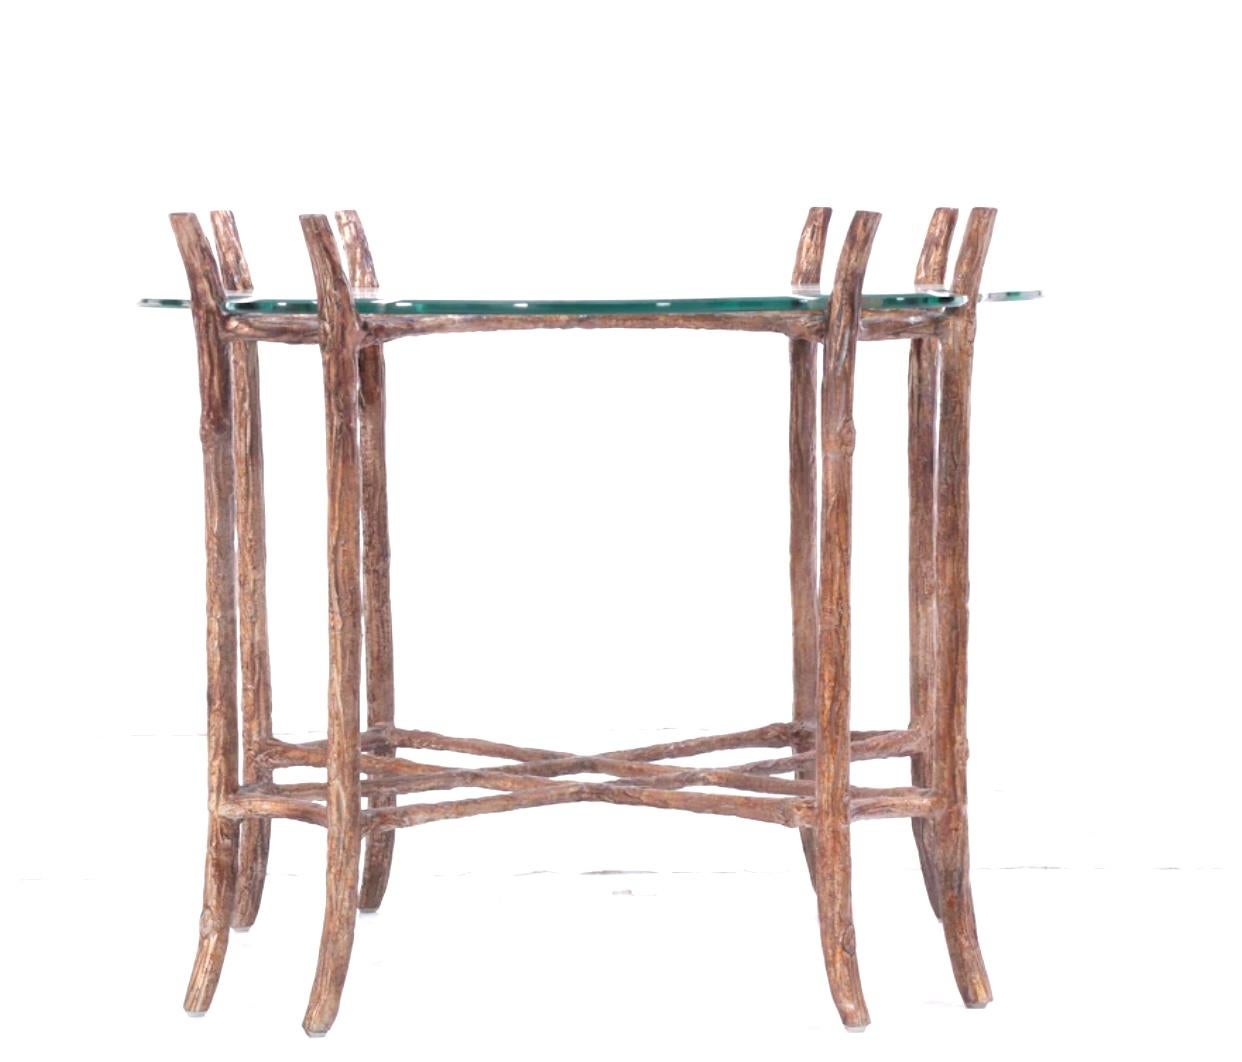 Cast aluminum and hand painted faux bois finished glass top side table. At first glance this beautiful table appears to be made of tree branches. The faux bois finish is quite realistic. The beveled glass top is cut to fit the double legged